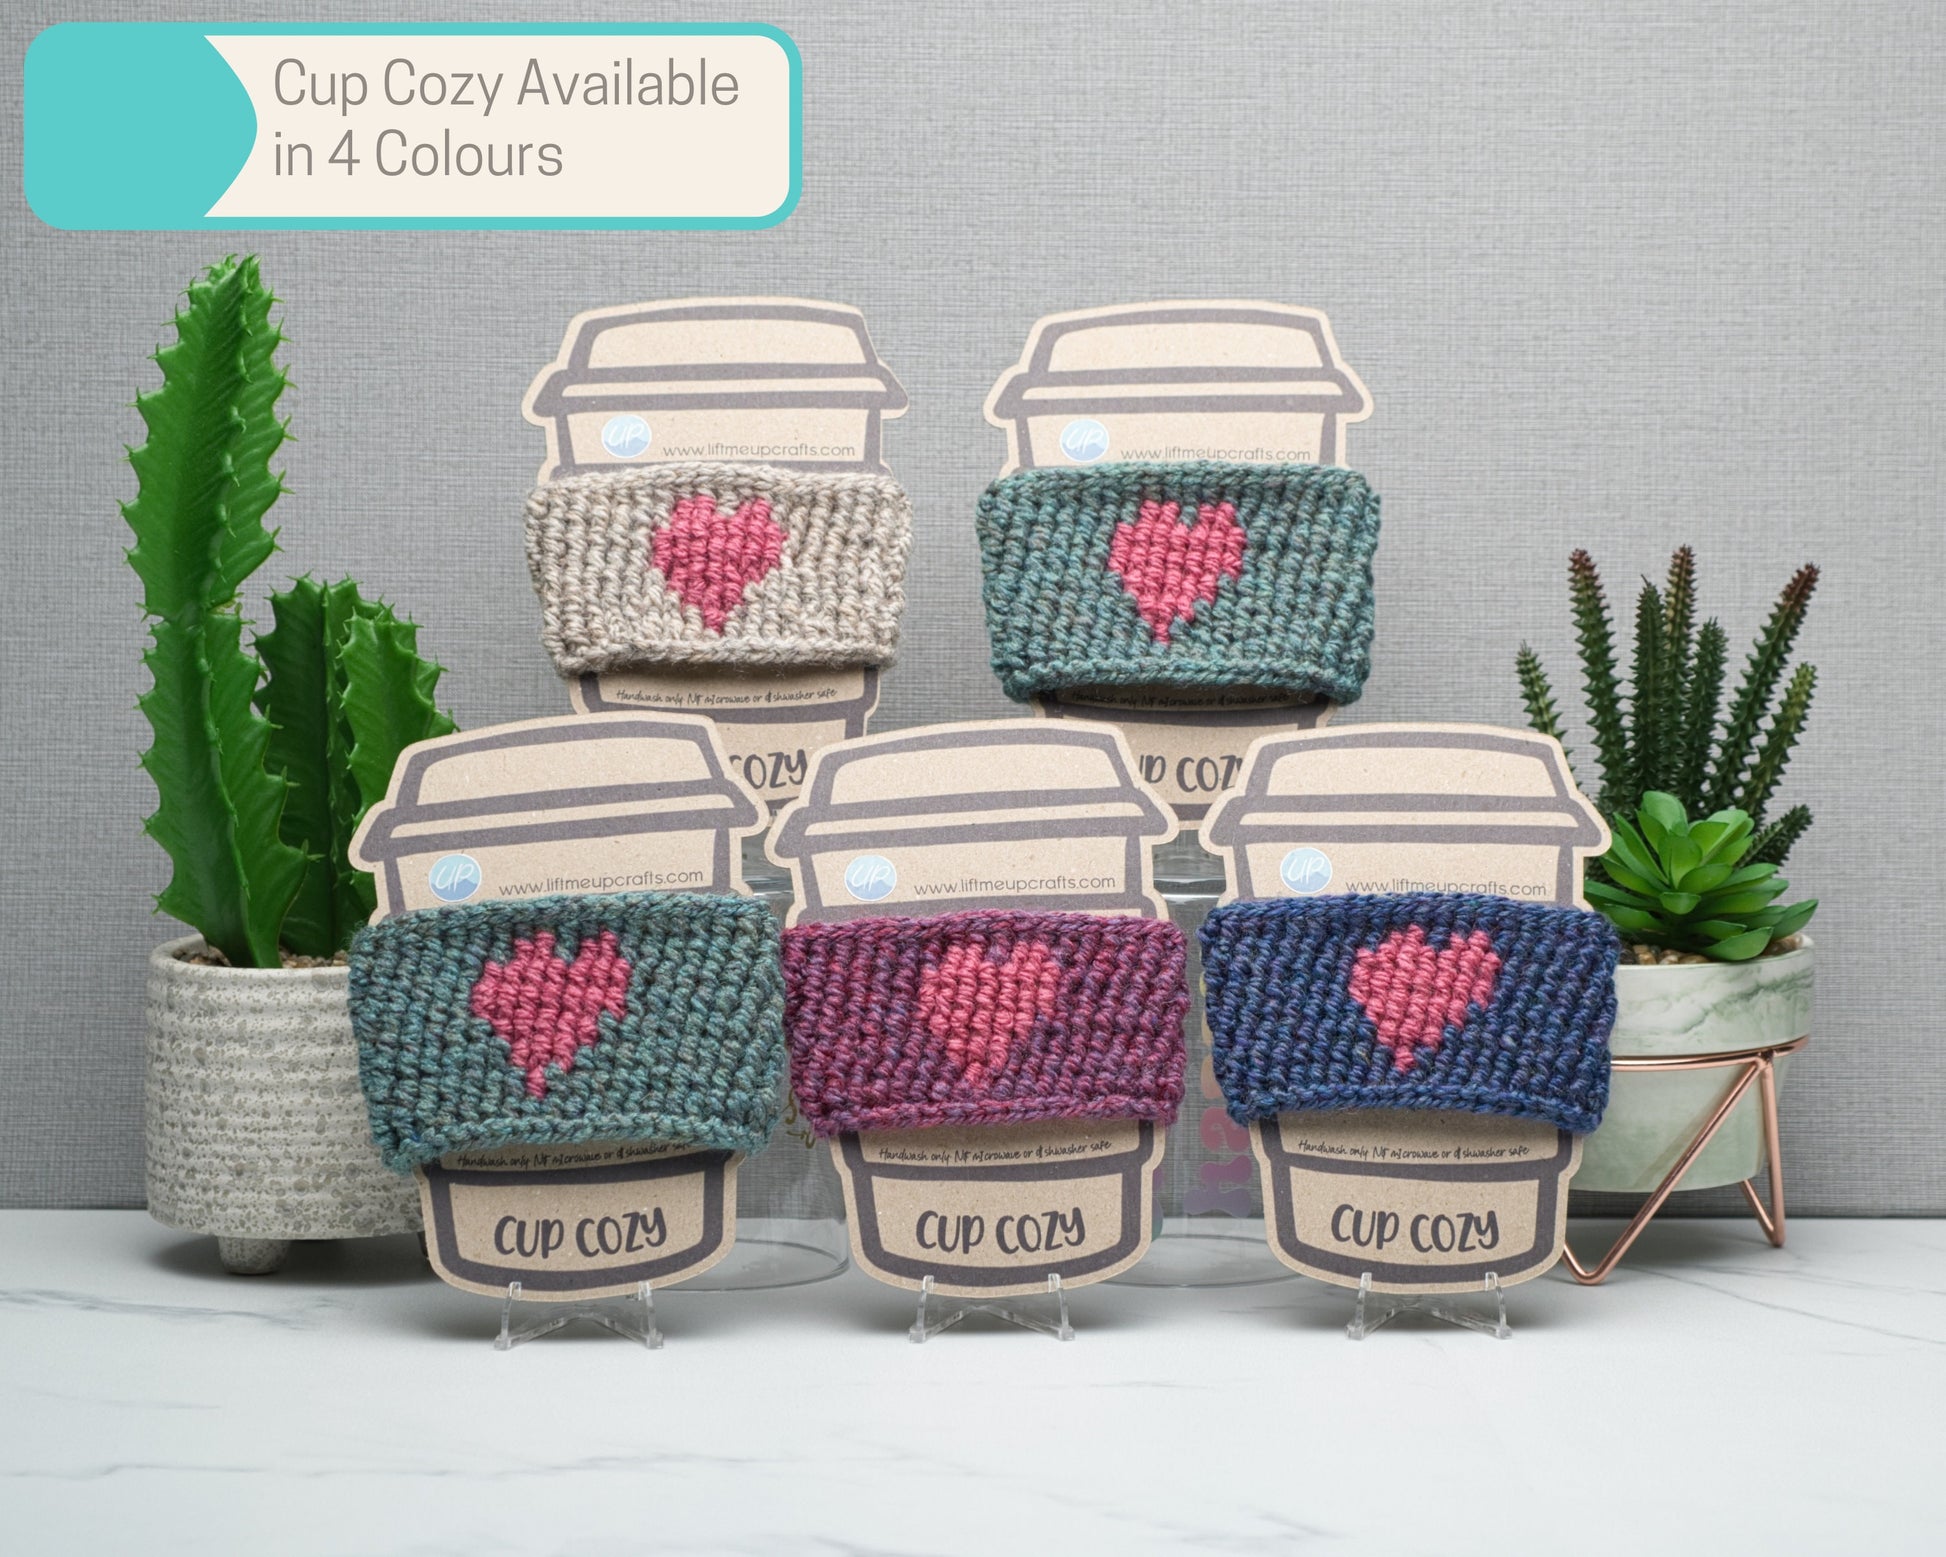 Cute Crochet Heart Cup Cozy for Takeaway Cups, Eco Friendly Handmade Coffee Lovers Gift, Hot Chocolate Hug, Self Care Inspirational Quotes